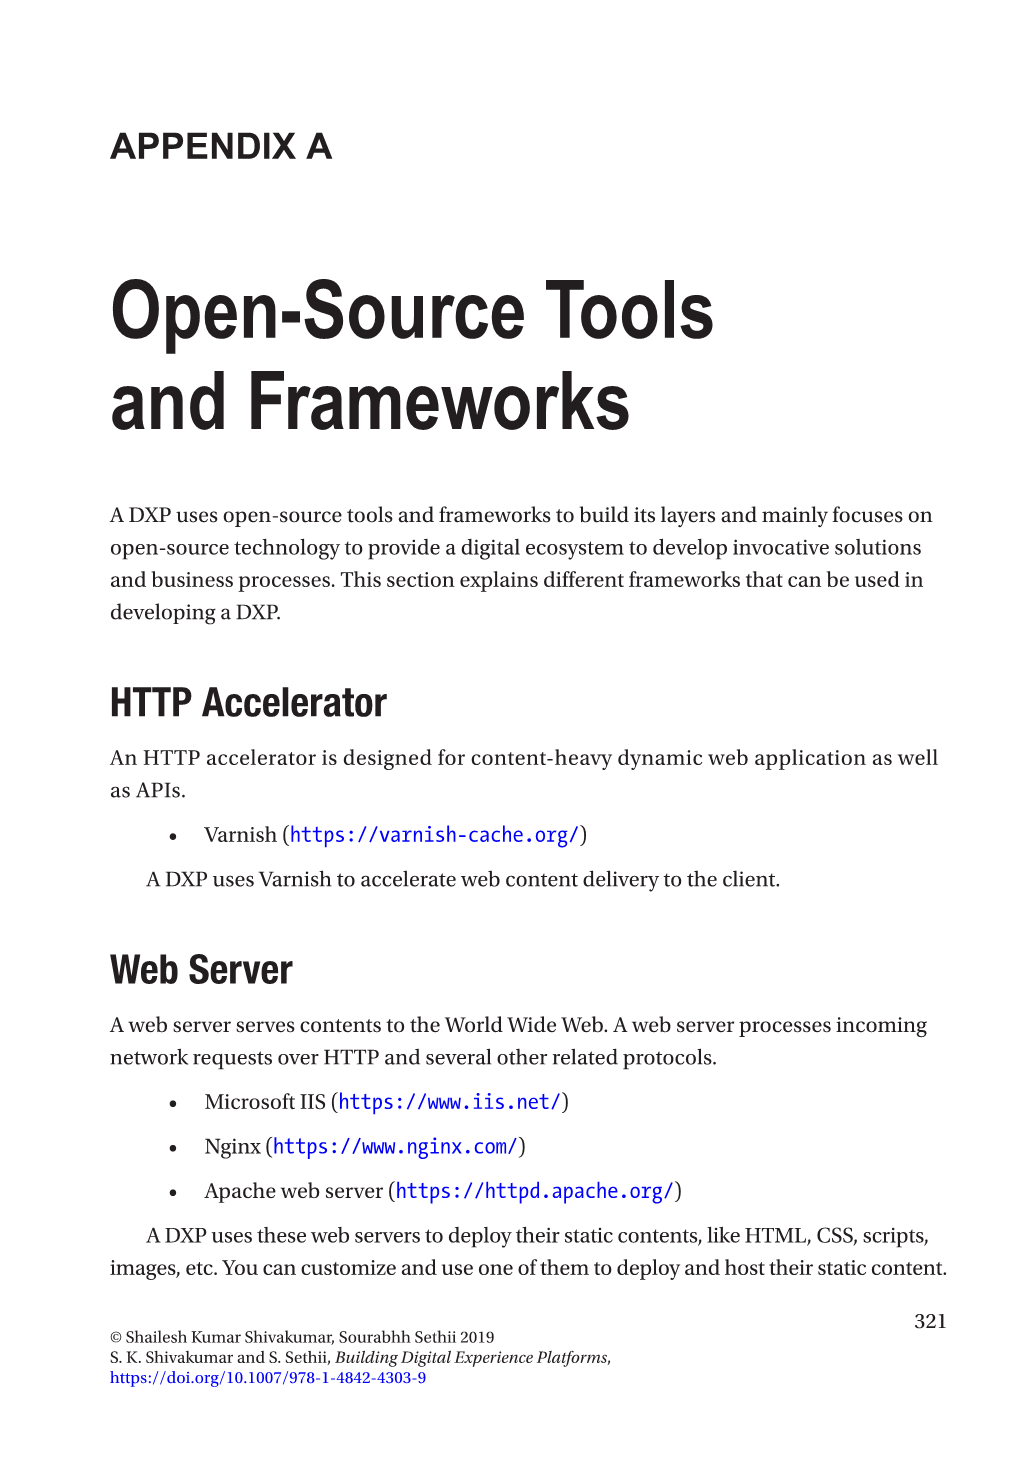 Open-Source Tools and Frameworks